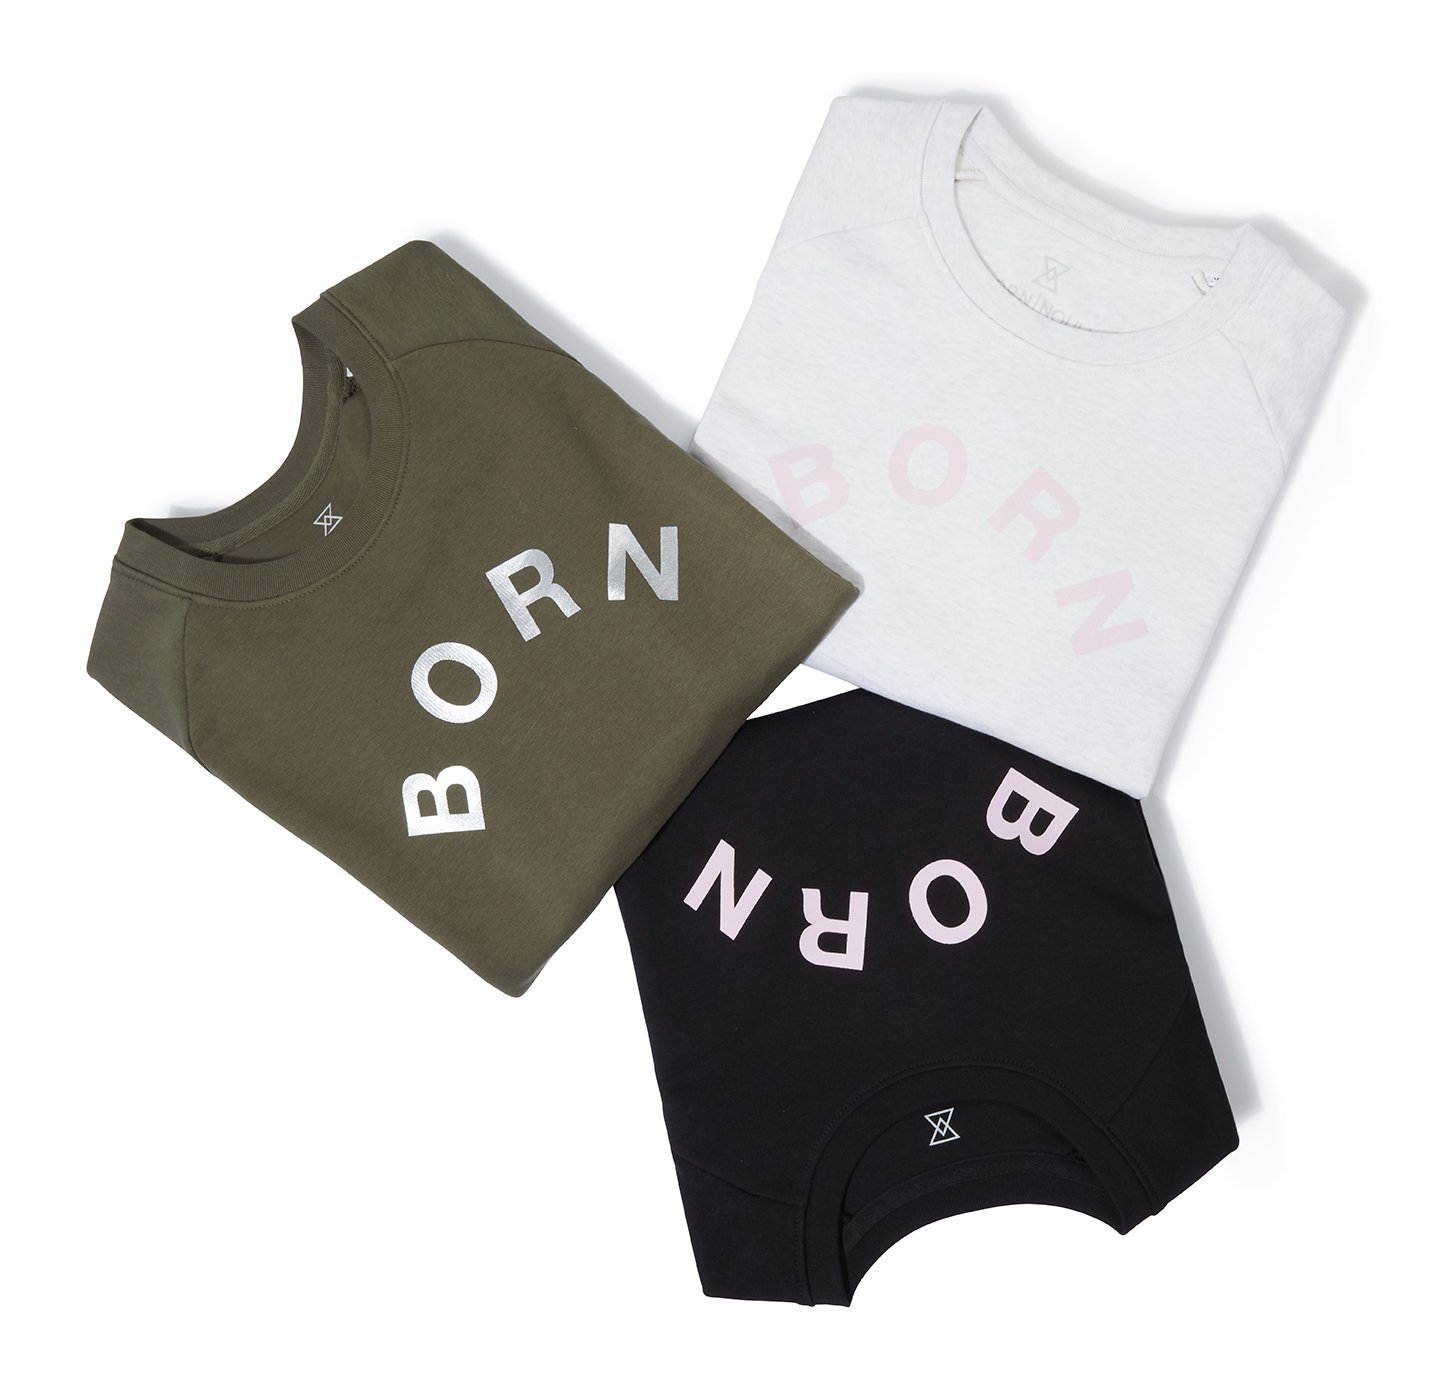 Fair Wear Certified Organic Sweatshirts in Organic Cotton and Recycled Polyester by Born Nouli